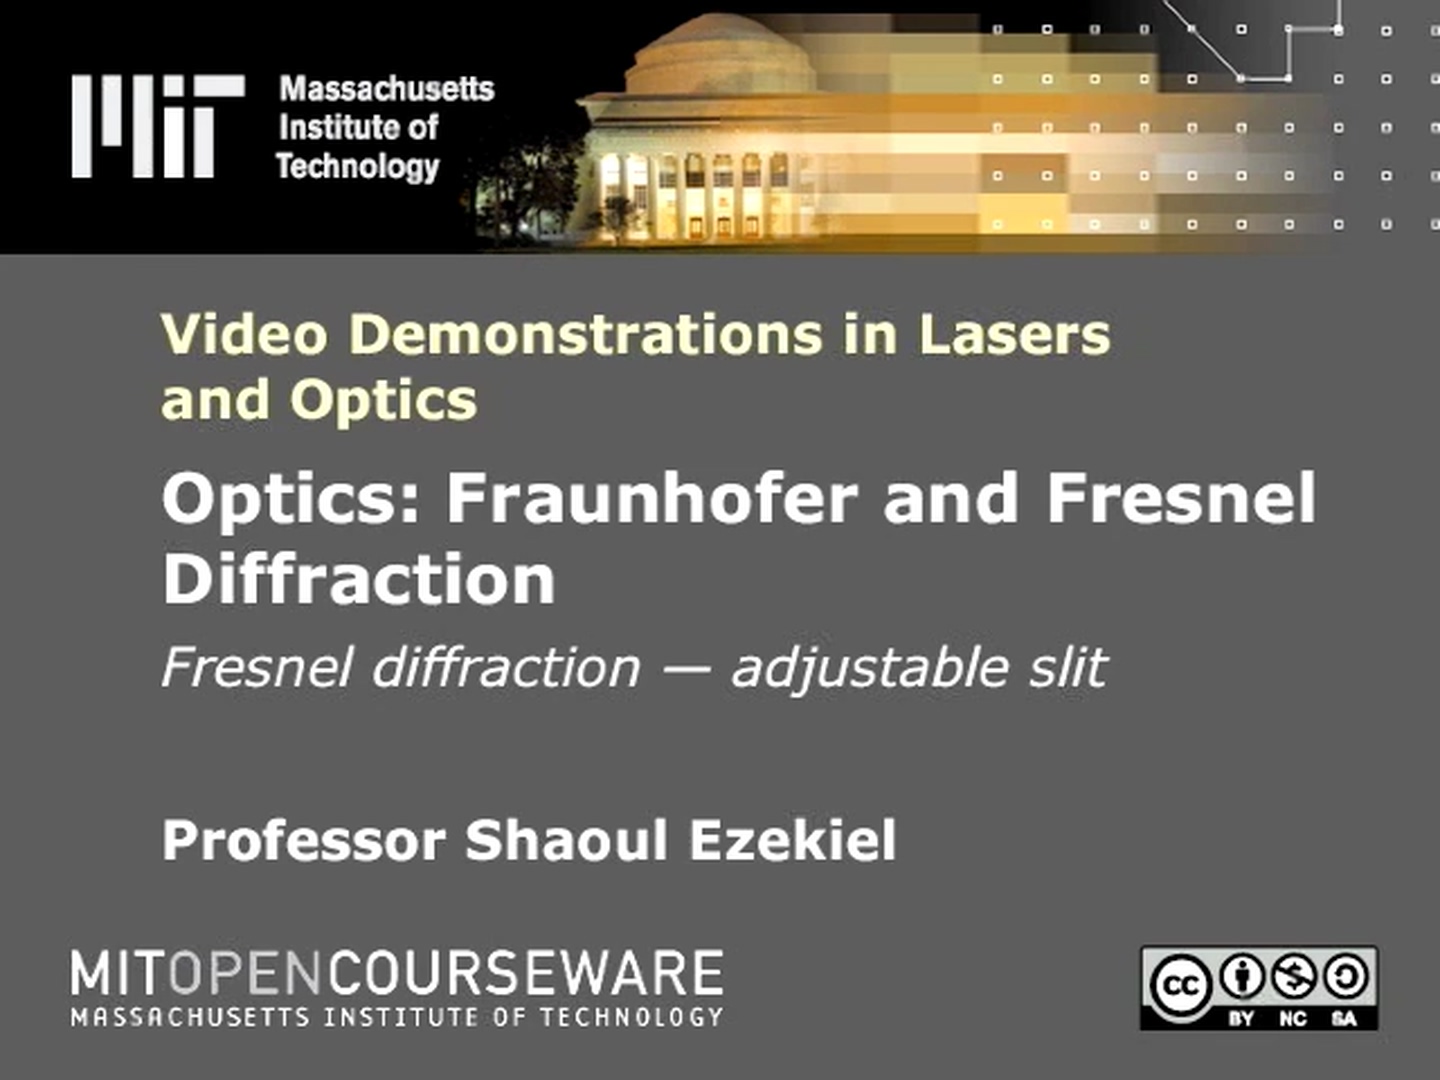 Optics - Fresnel diffraction - adjustable slit  MIT Video Demonstrations in Lasers and Optics